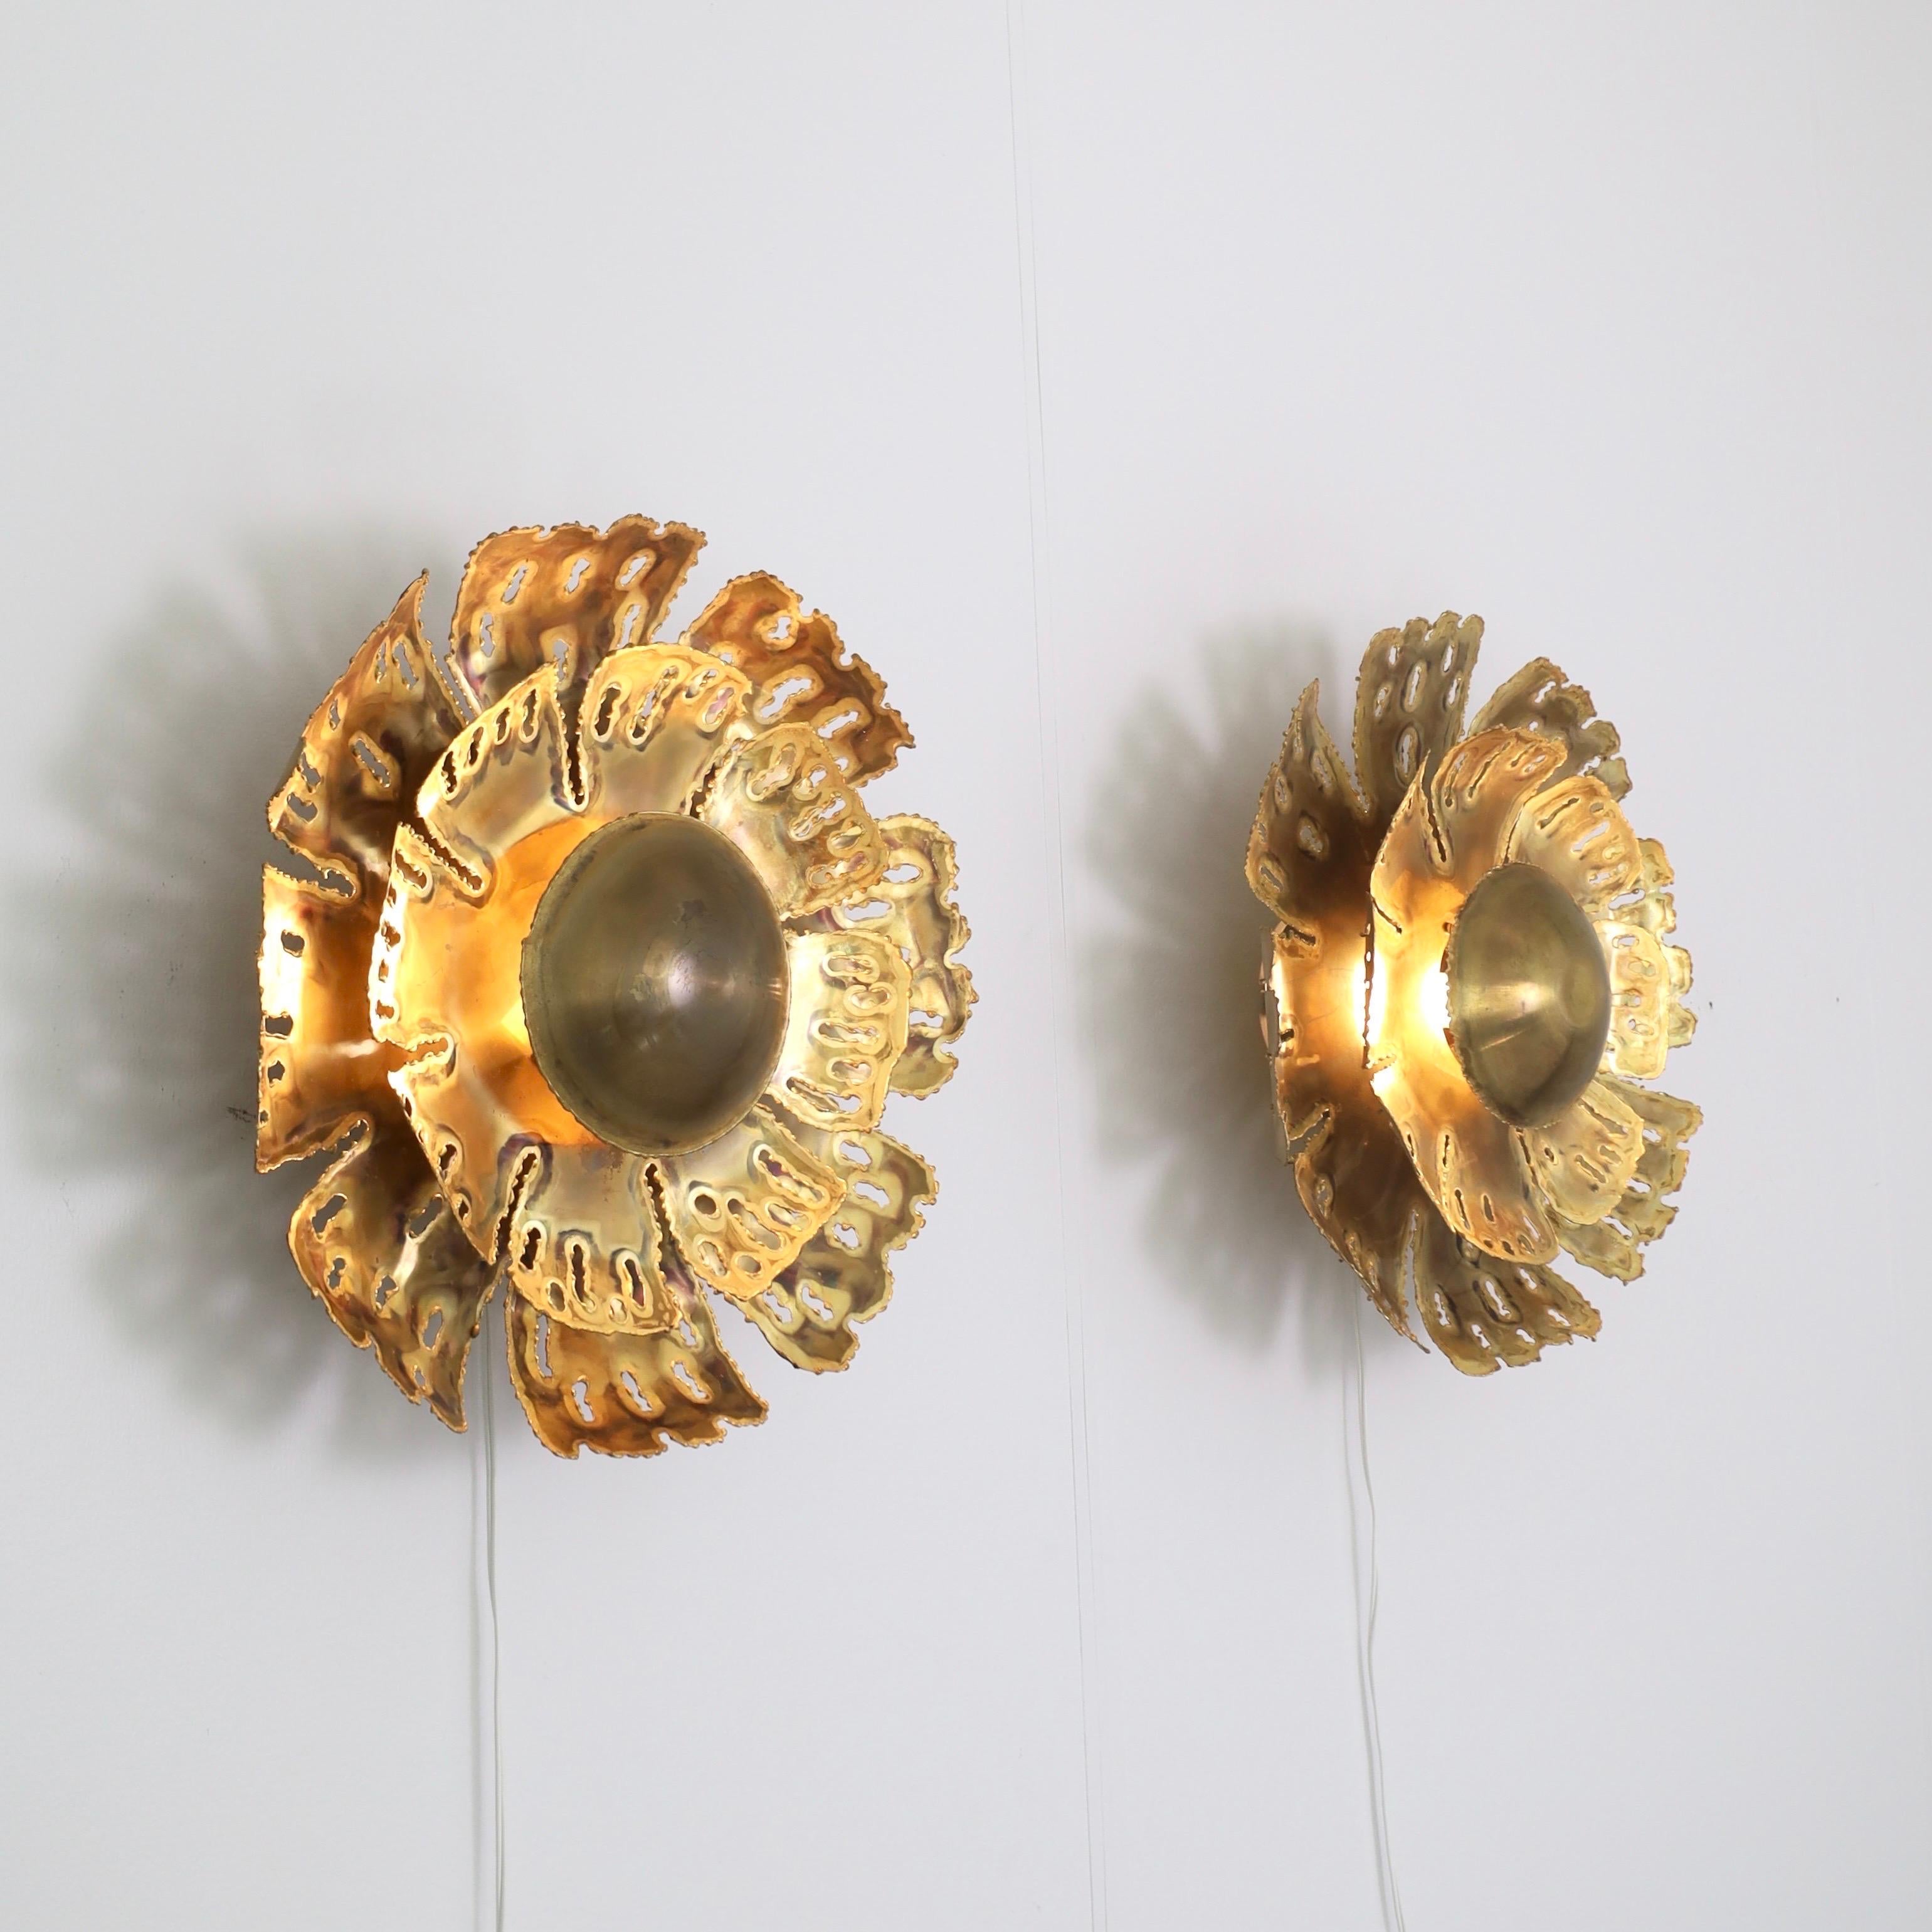 A pair of substantial sun-shaped brass wall lamps designed by Svend Aage Holm Sørensen in the 1960s. An eye-catching set for a beautiful place. 

* A pair (2) of flame-cut sun-shaped brass sconces
* Designer: Svend Aage Holm Sorensen
* Model: 5207
*